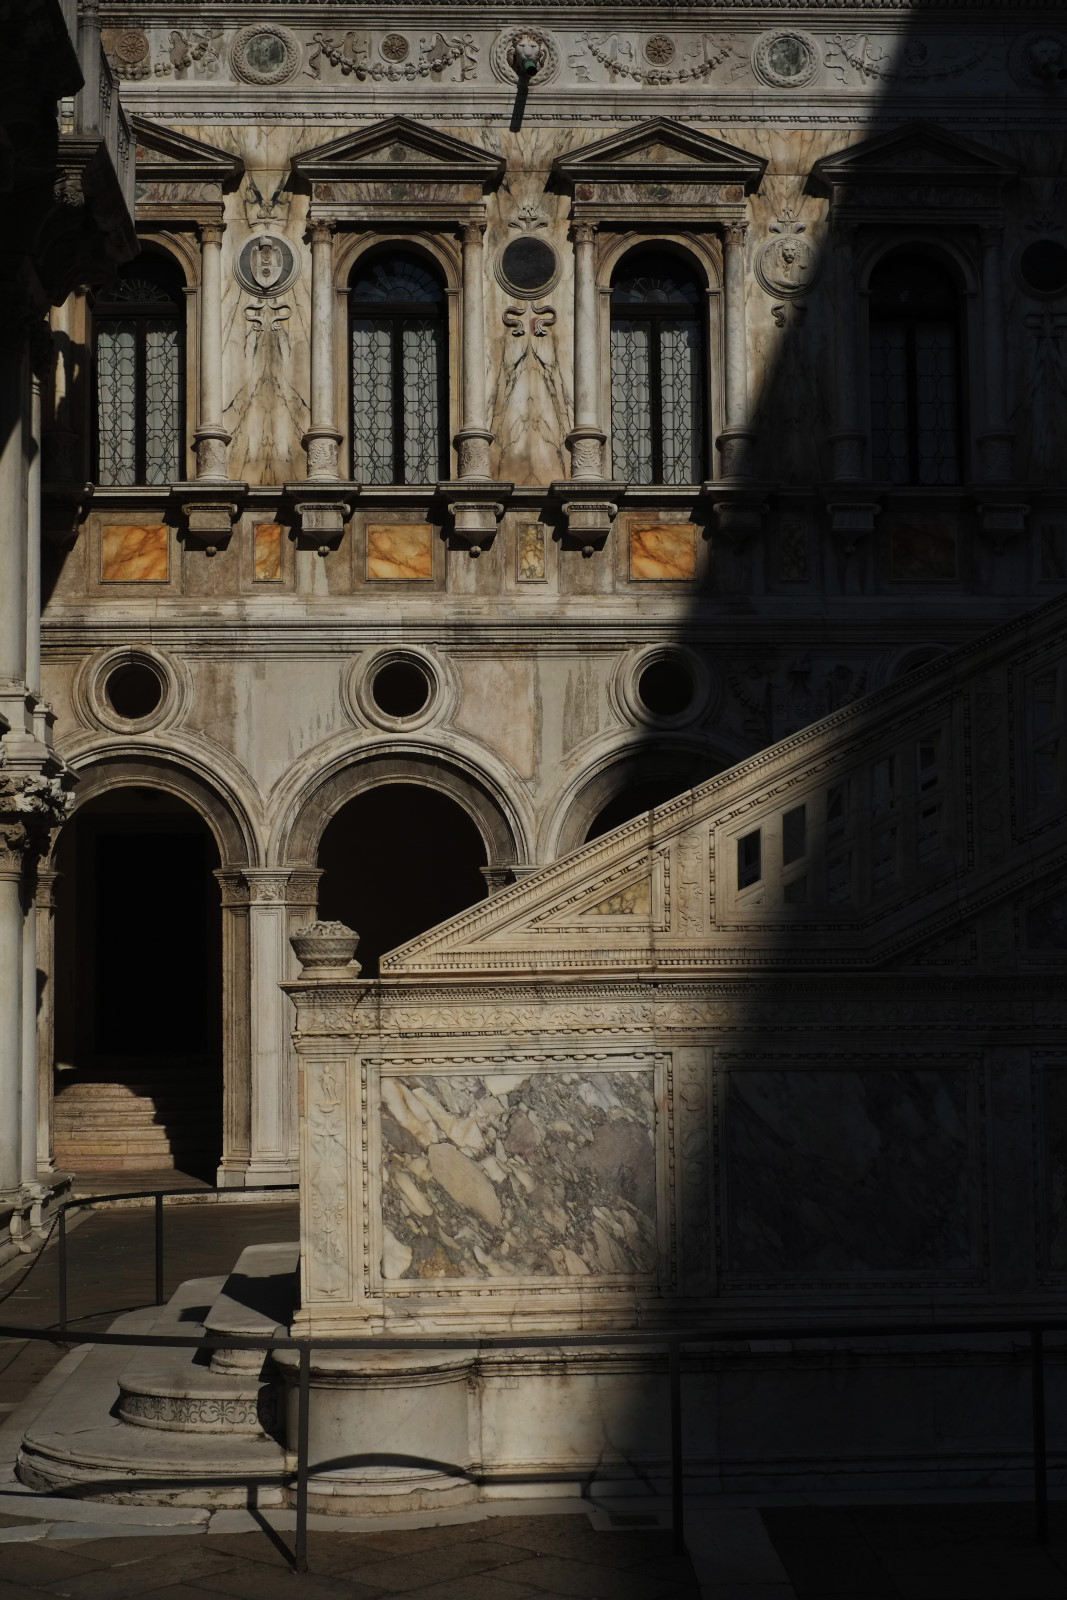 Marble arches, columns walls and stairs in strong shadows and light, courtyard of the Doge's Palace, Venice,Italy.